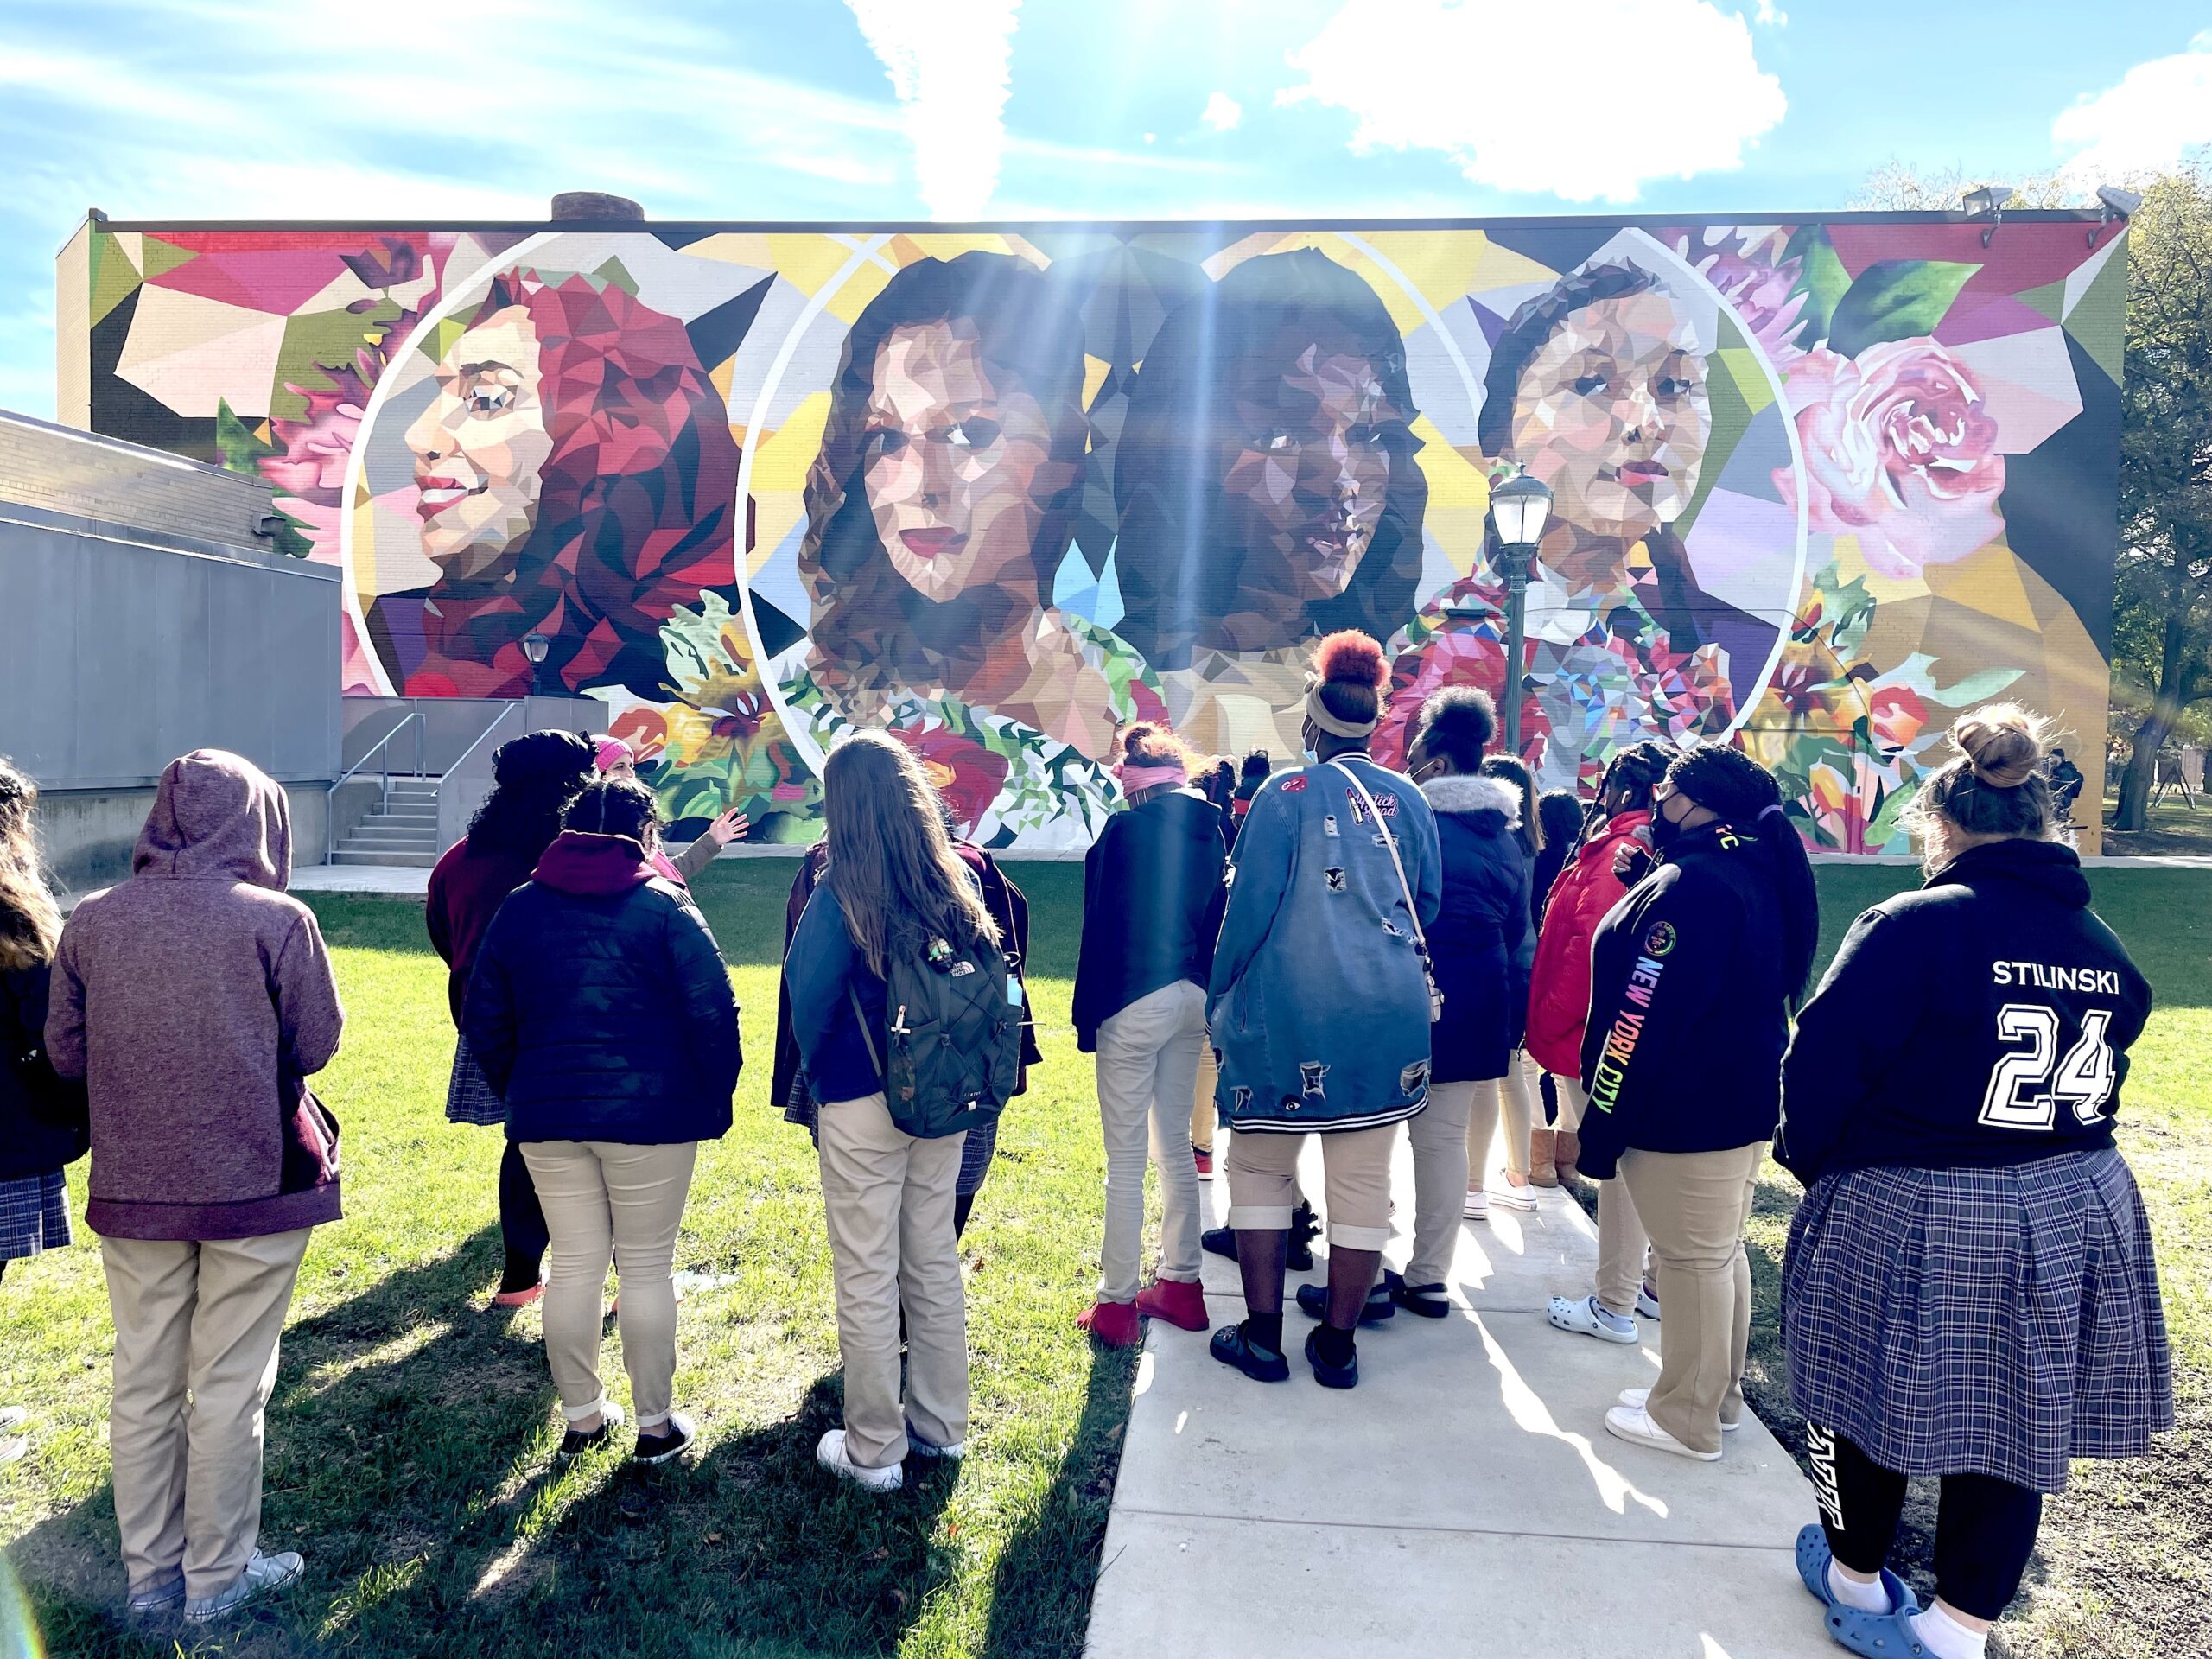 MKE Roots - Explore MKE. Students at Marquette mural.